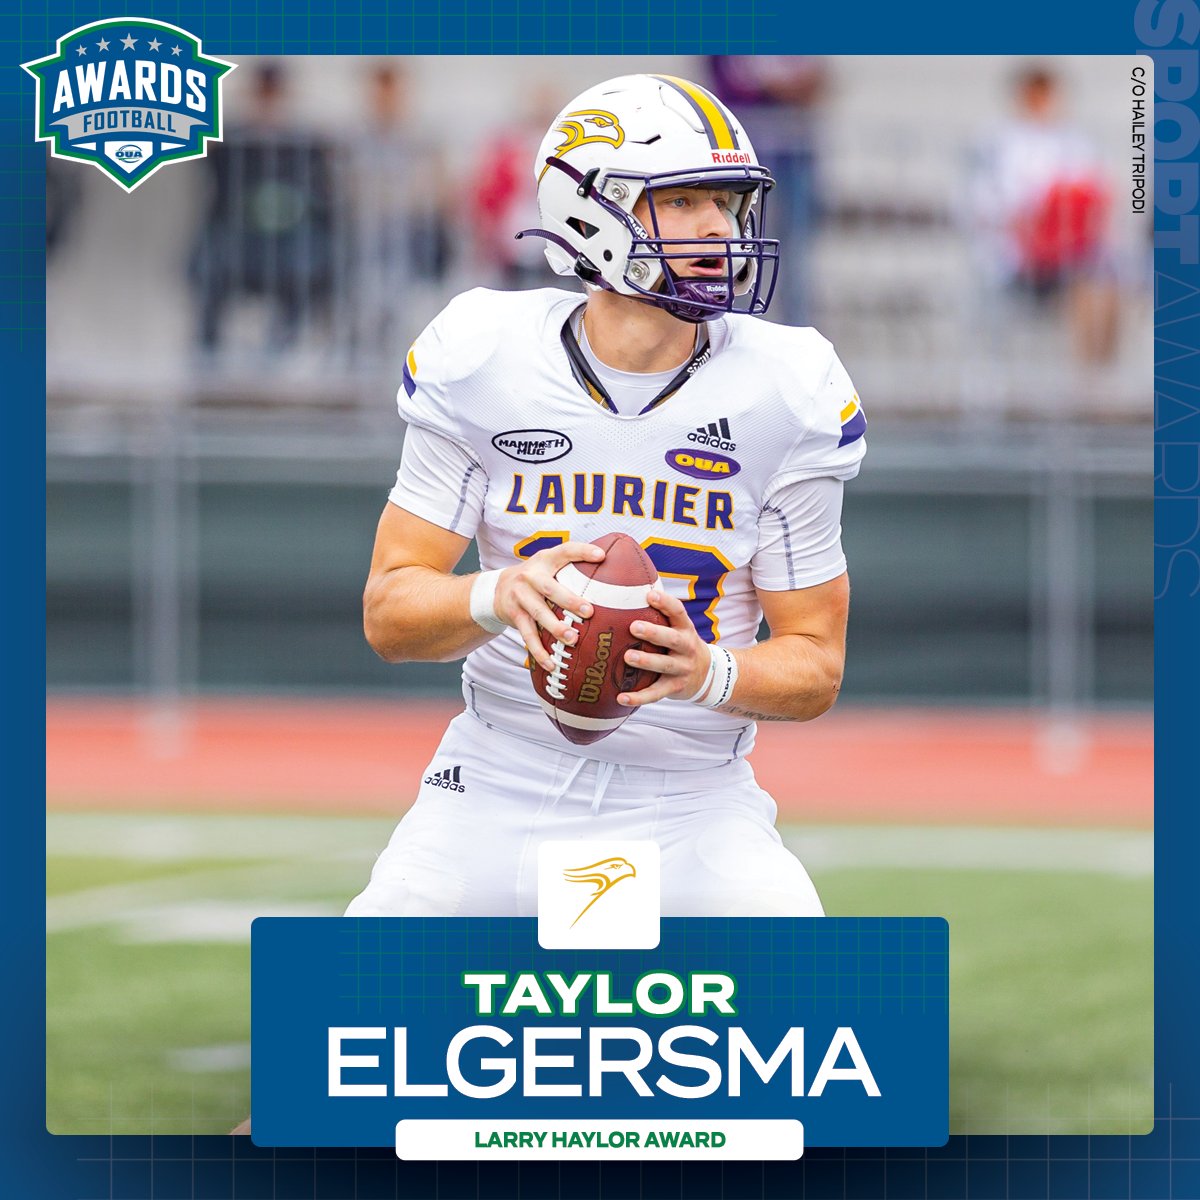 Congratulations to @WLUAthletics Taylor Elgersma, who has been named the Larry Haylor Award recipient as the 2023 #OUA football most valuable player. 🏈 #WeAreONE | #QuestForTheCup